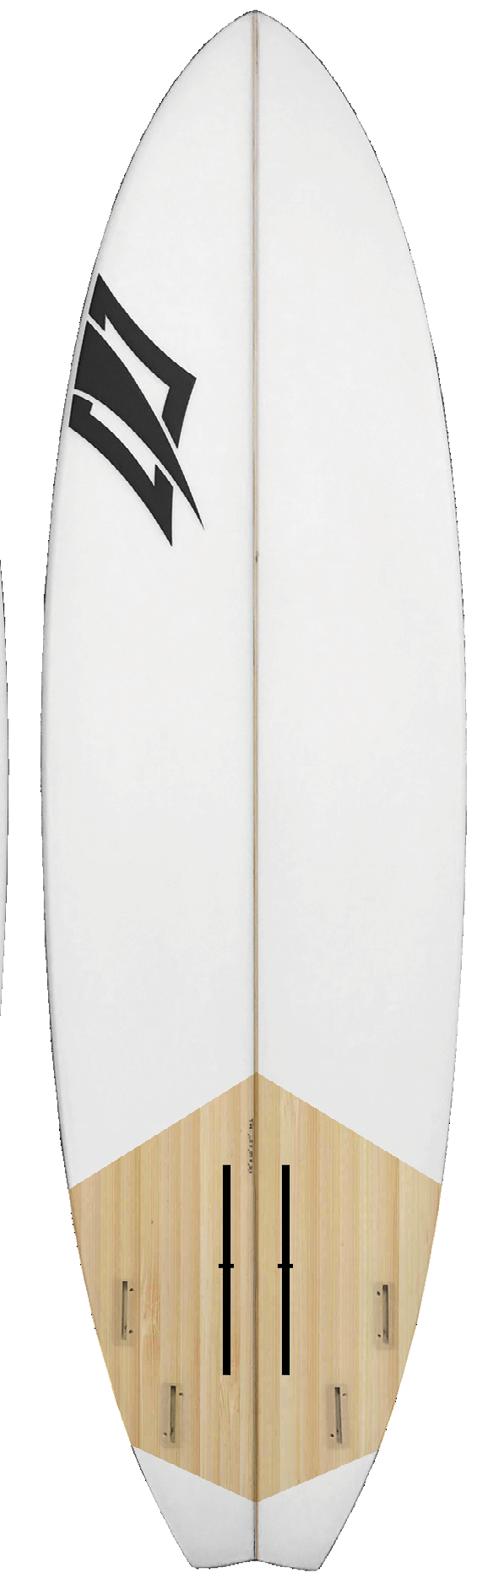 H OV E R F O I L B OA R D S Hover 6 0 Surf foilboard FOIL SHORTBOARD SIZE 6 0 Naish s new surf foilboards give you a piece of the endless summer by harnessing the power of the ocean.